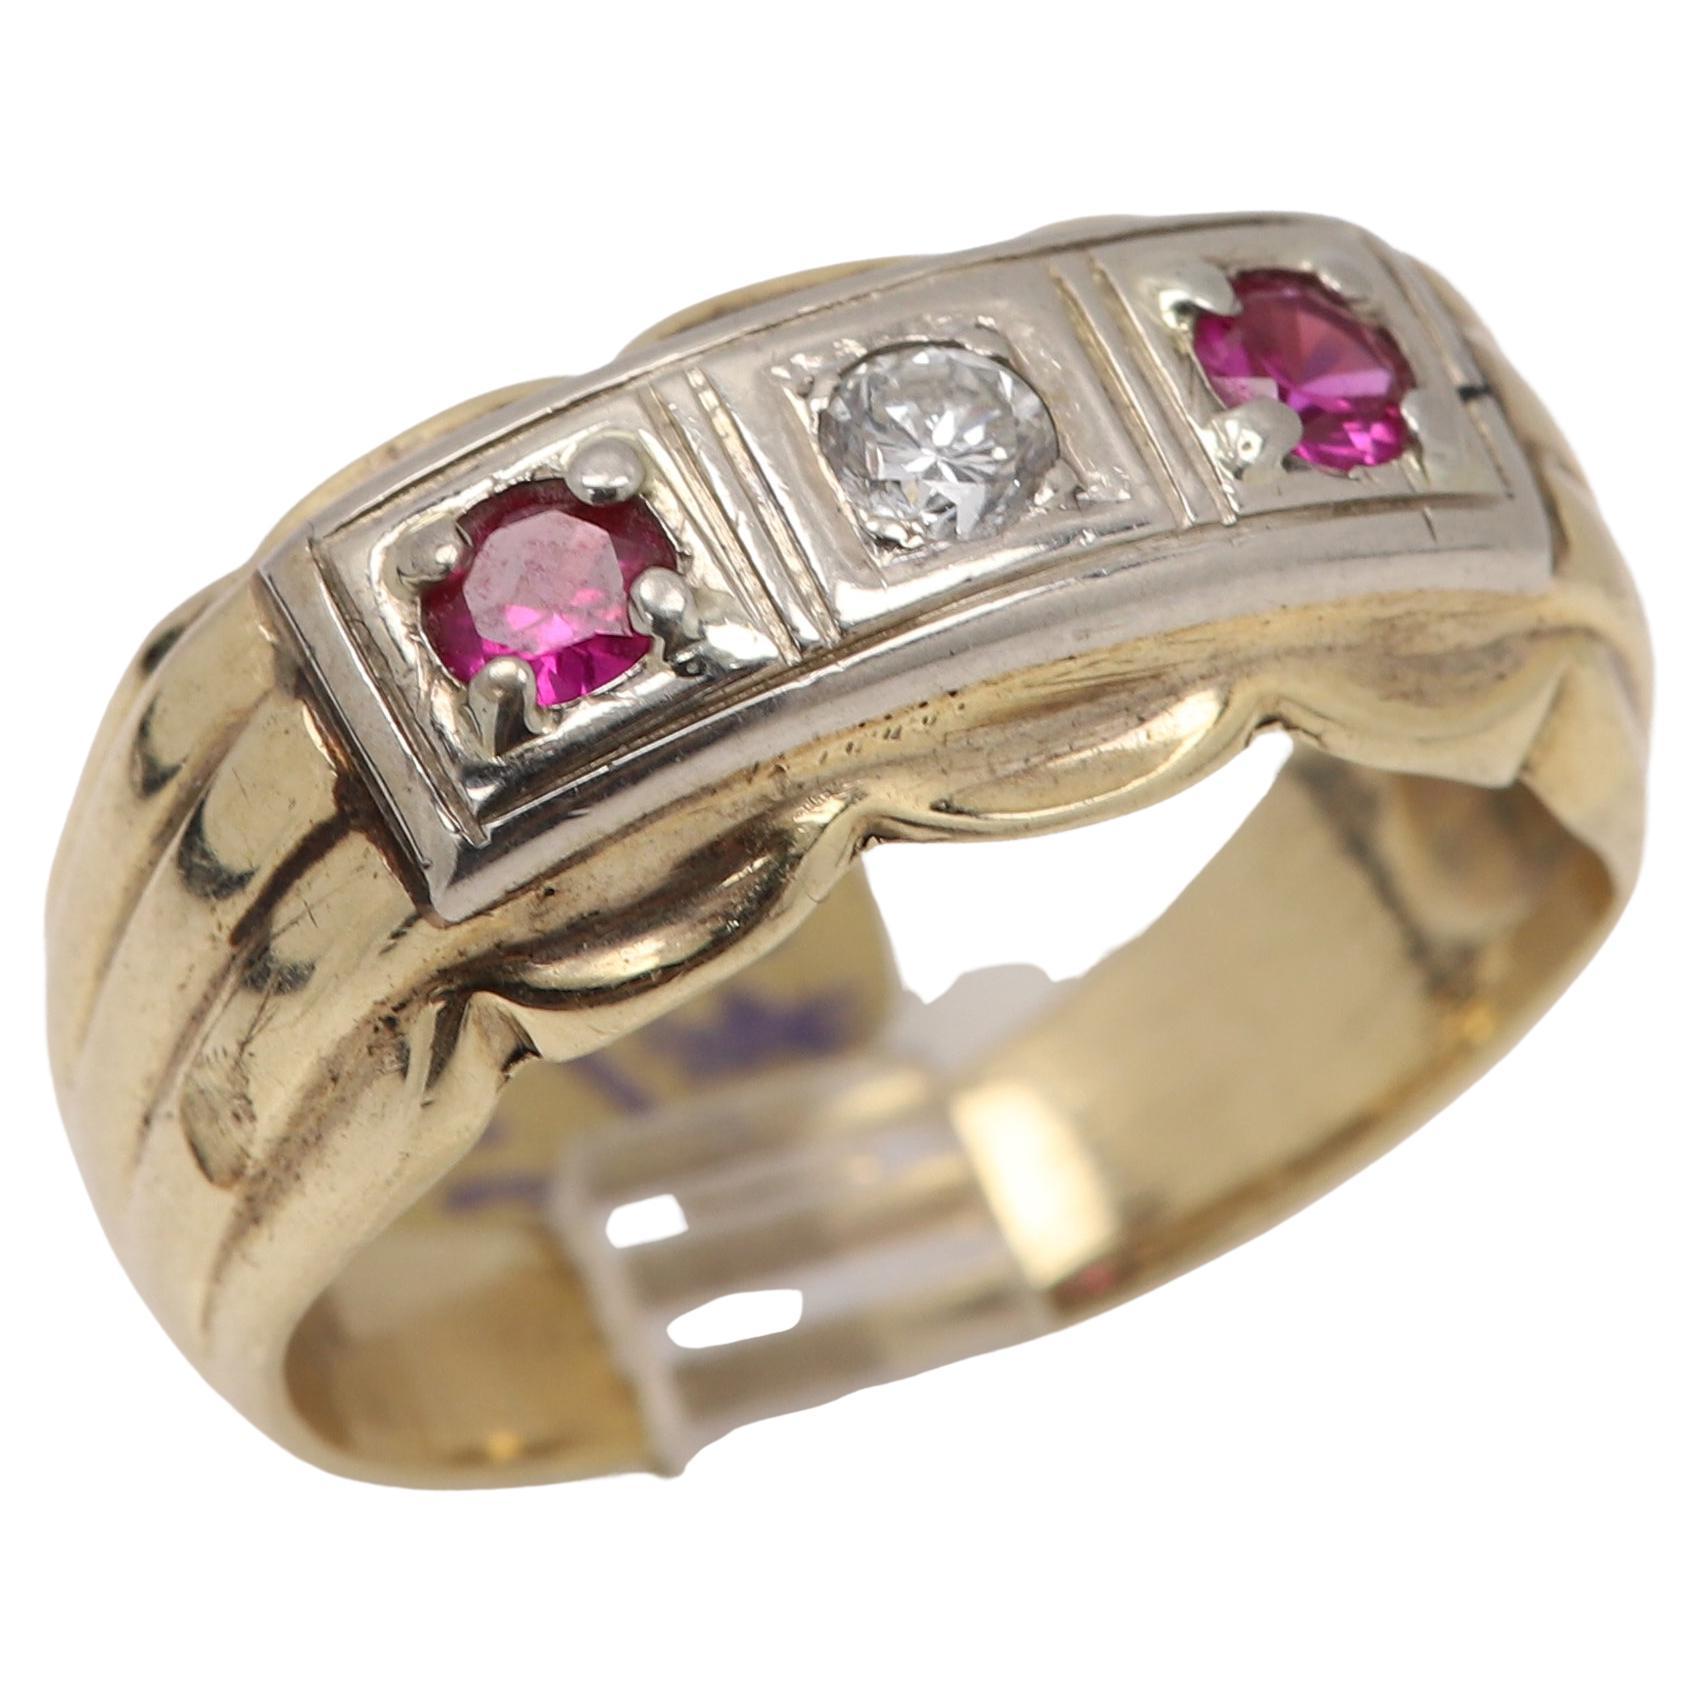 Vintage 3 stone Ring for Men
Circa 1940's
14 Yellow and White Gold
It can been more Clean however we didn't want to touch it.
Diamond and Ruby are Natural approx size 3.5 - 4.0mm
Finger size 9
overall width of the ring is 10mm
condition: Wear